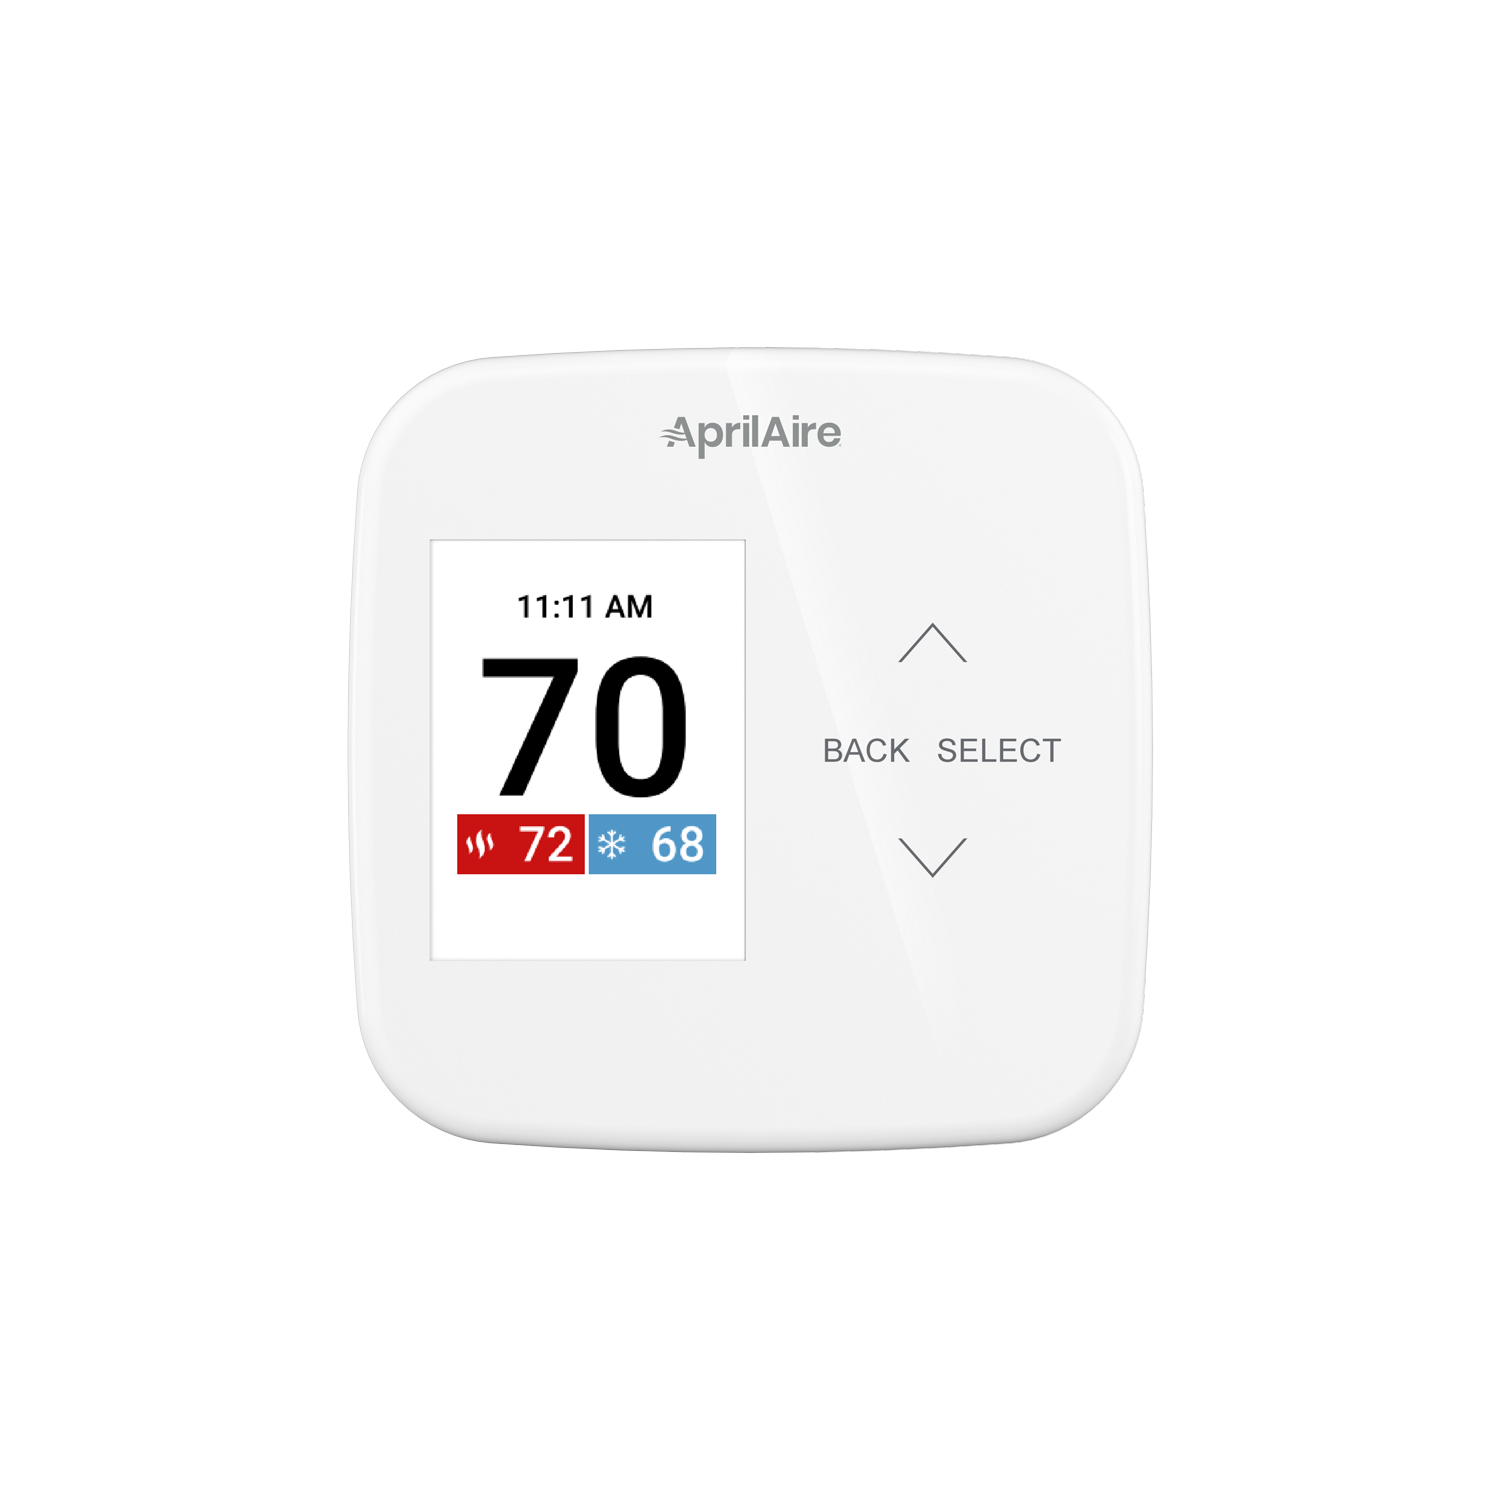 AprilAire S86 Series Programmable Thermostat